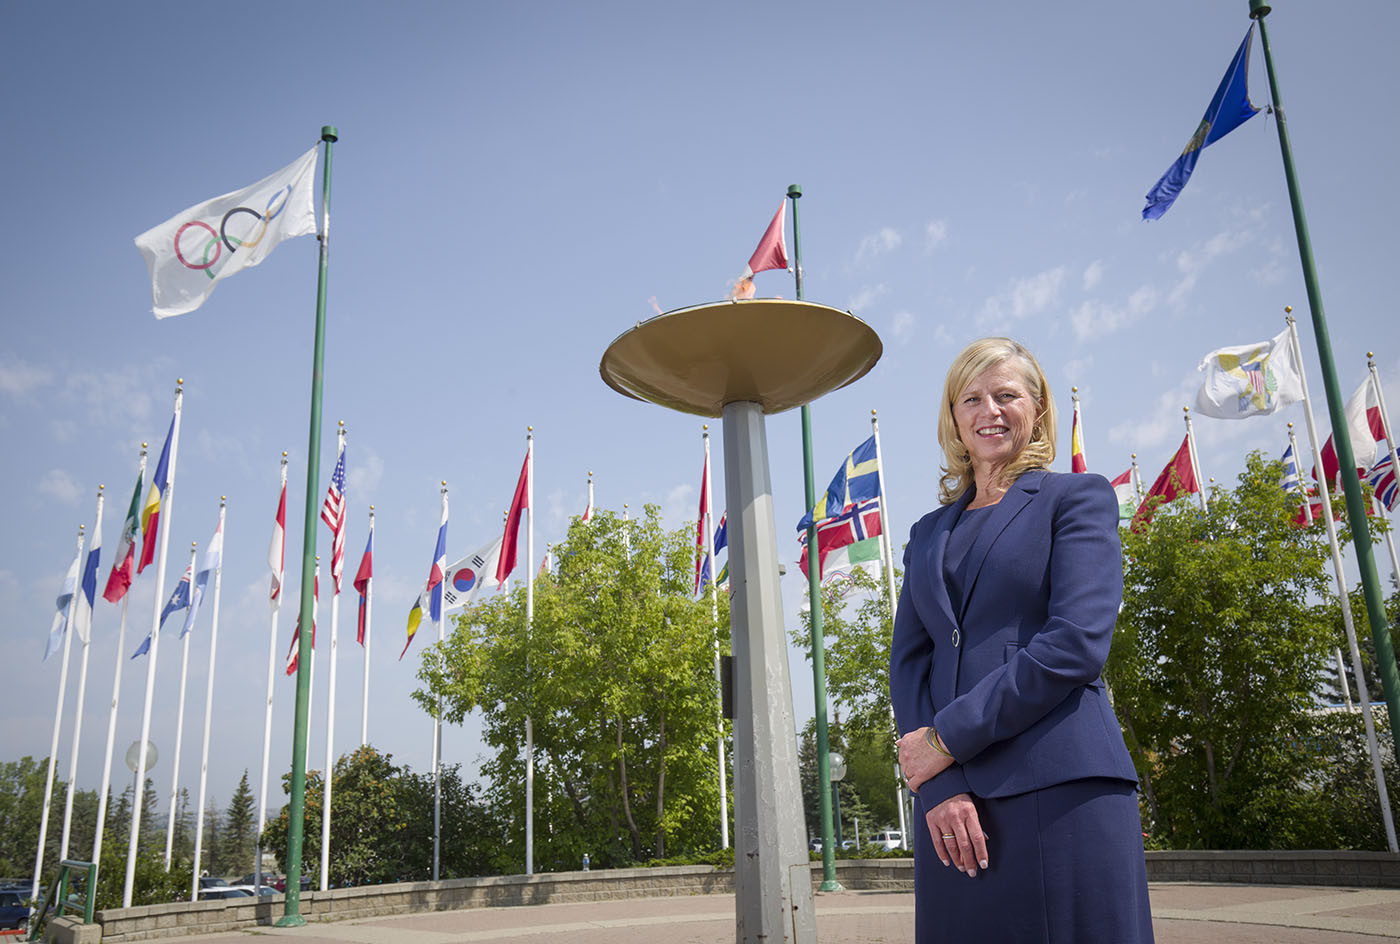 Mary Moran was introduced as chief executive of Calgary's bid to host the 2026 Winter Olympic and Paralympic Games on Tuesday ©Calgary 2026